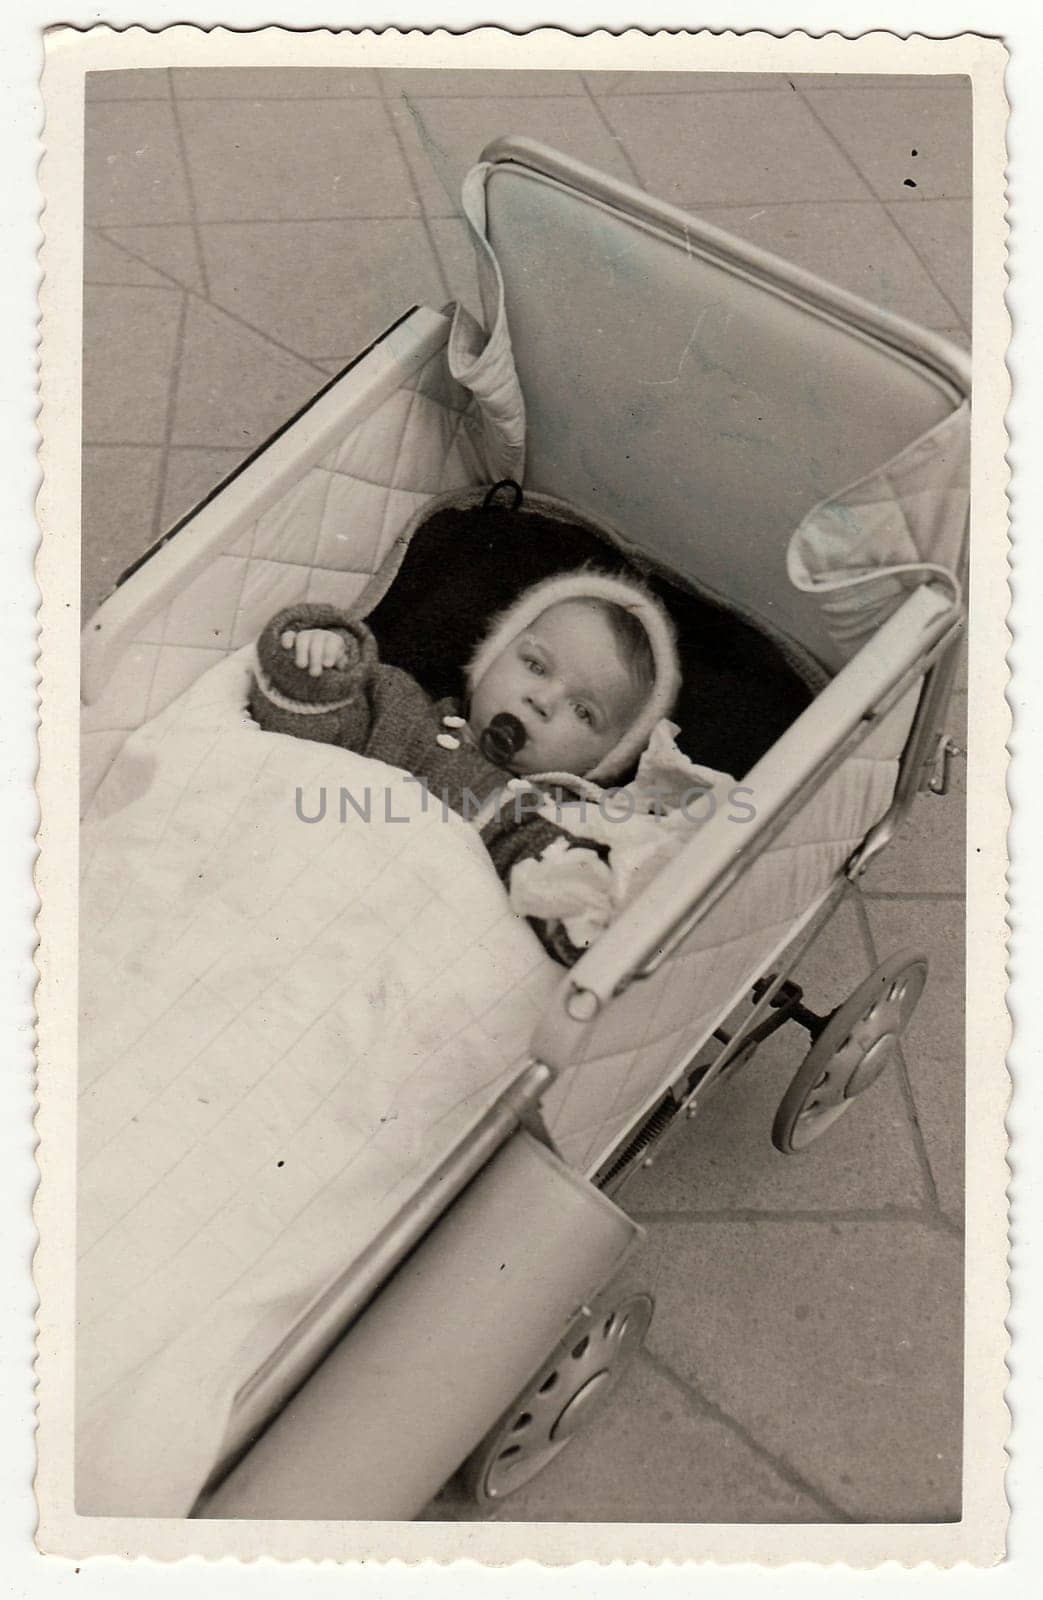 A vintage photo shows a small baby girl in a pram (baby carriage). by roman_nerud